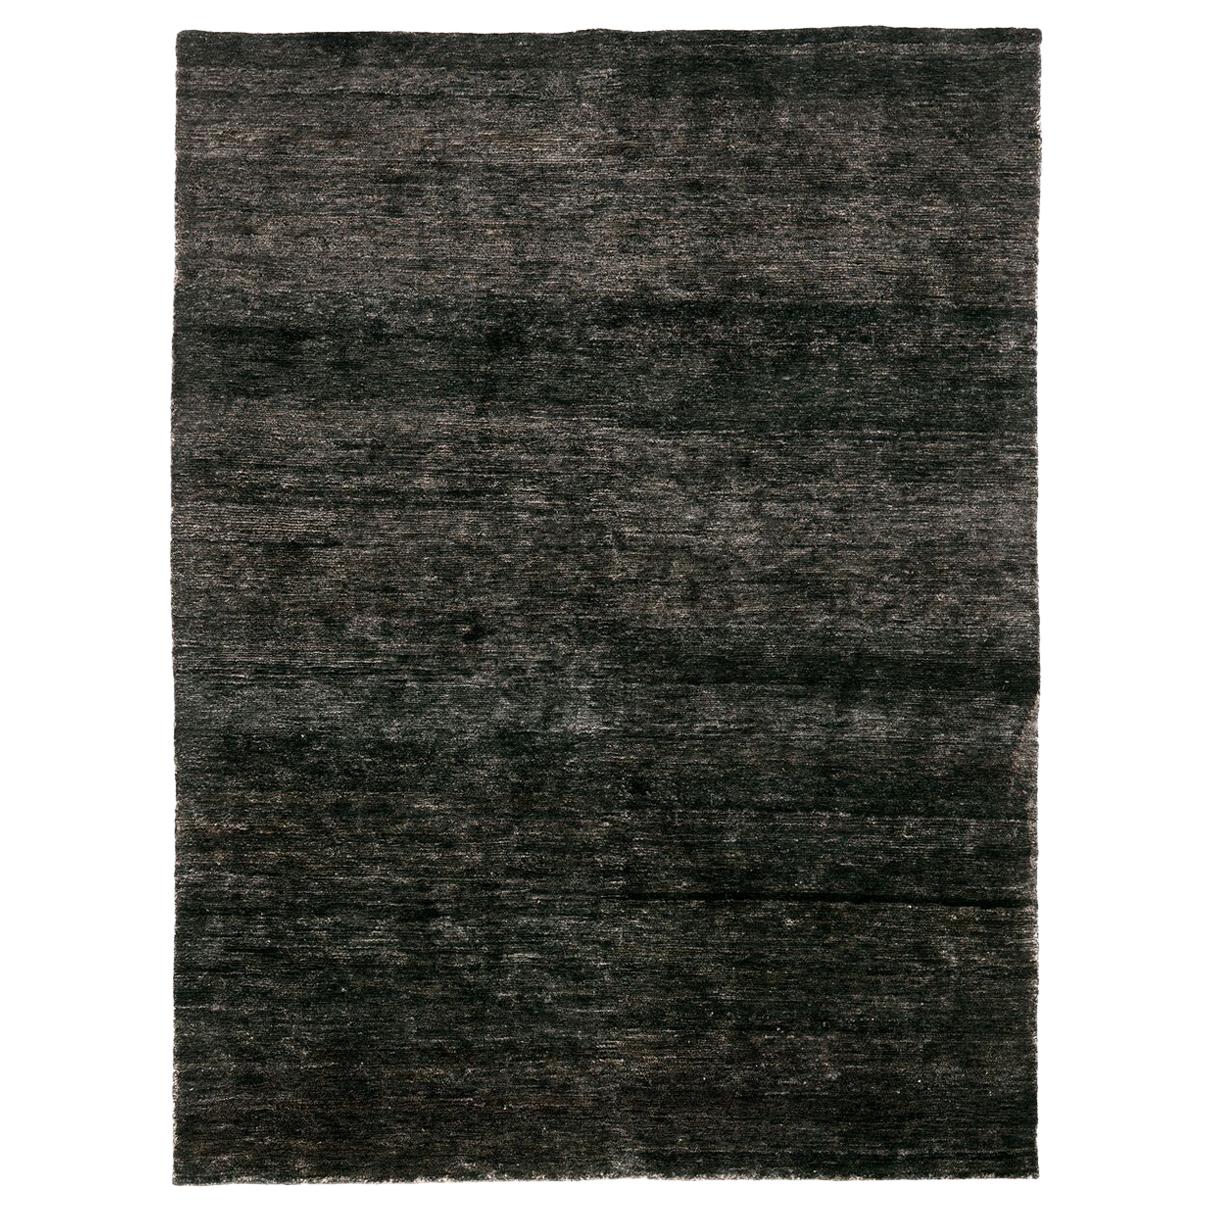 Noche Black Hand Knotted Jute Rug by Nani Marquina & Ariadna Miquel, Medium For Sale